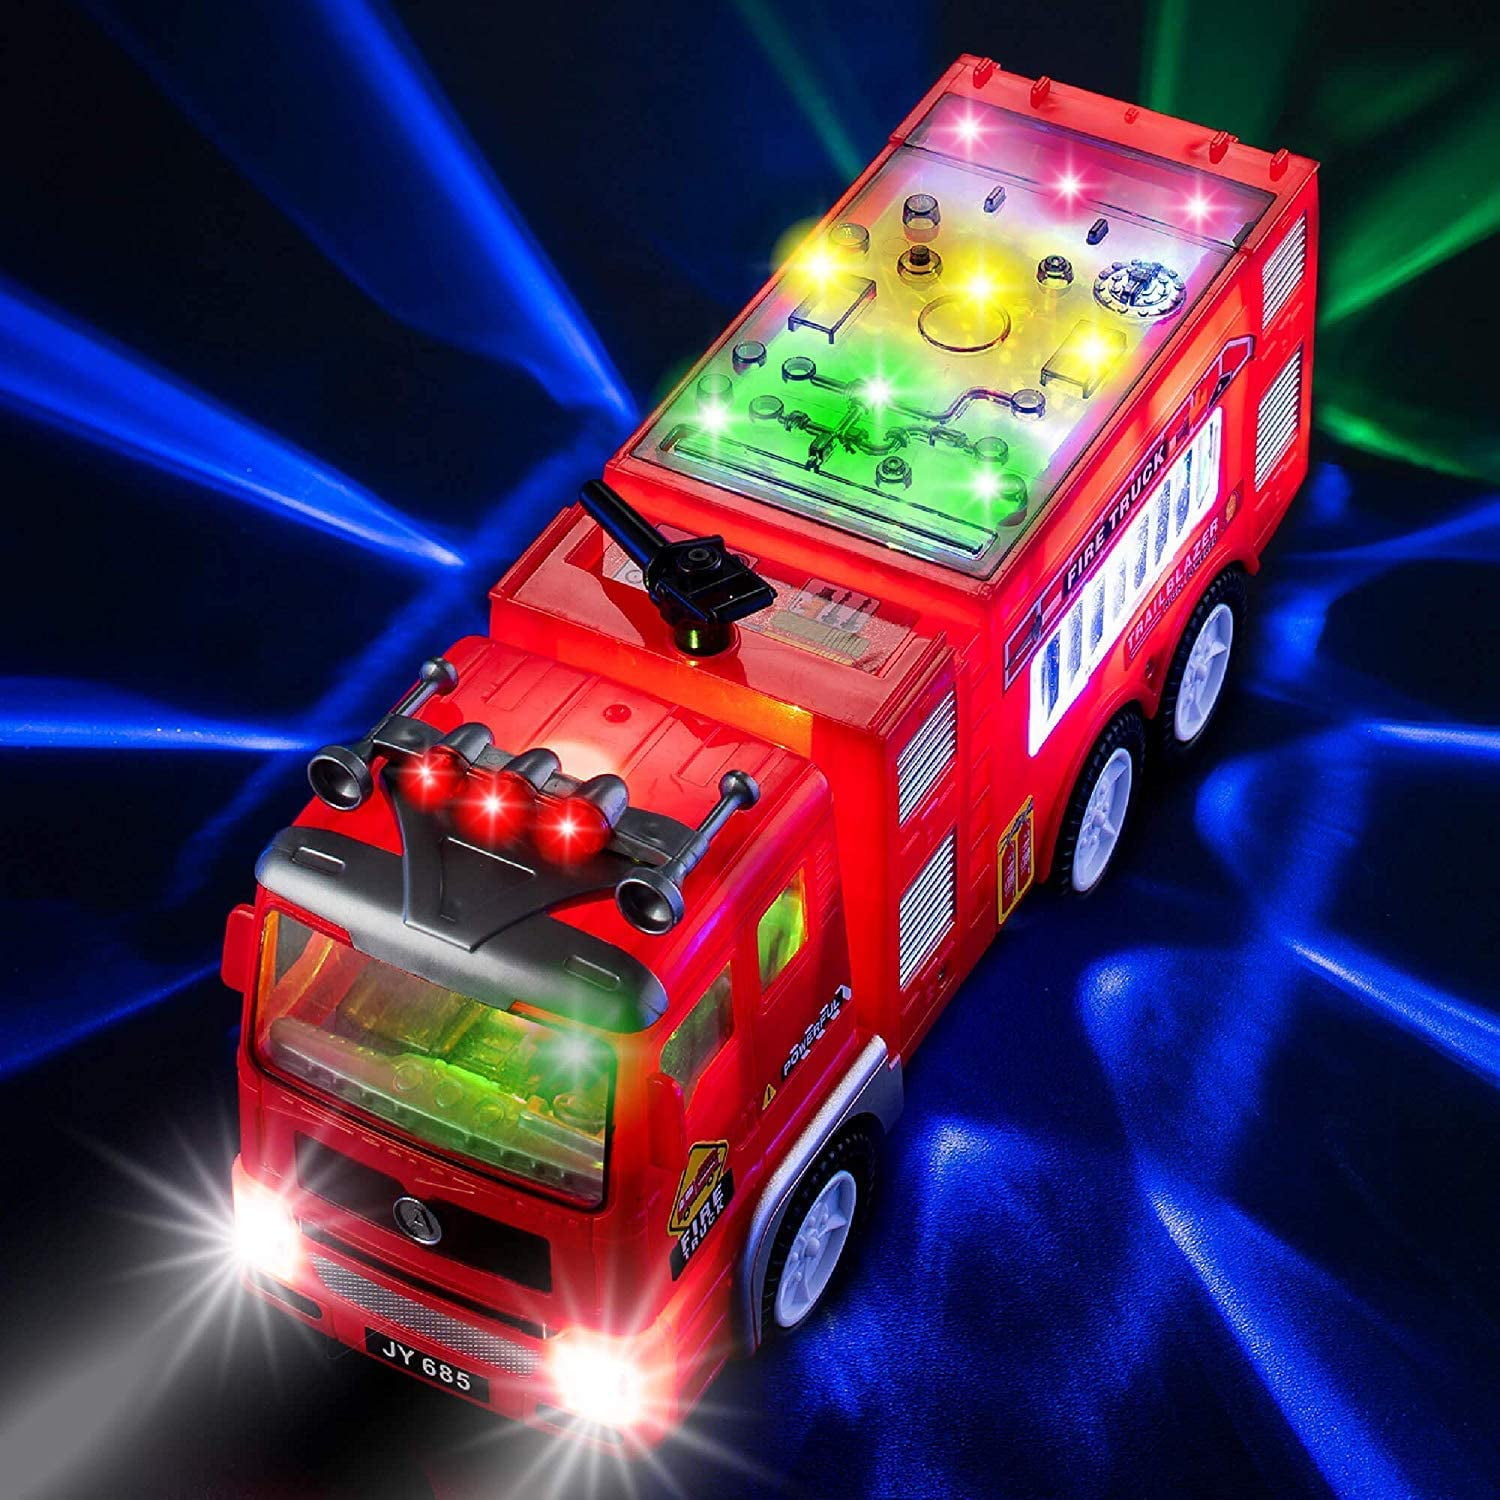  EERSTA 360 Degree Rotation, Fire Engine Model Toy with Ladder,  High Pressure Water Gun, Lights and Music, Fire Engine Model, Christmas  Birthday Toy Gift for Boy and Girl : Toys 